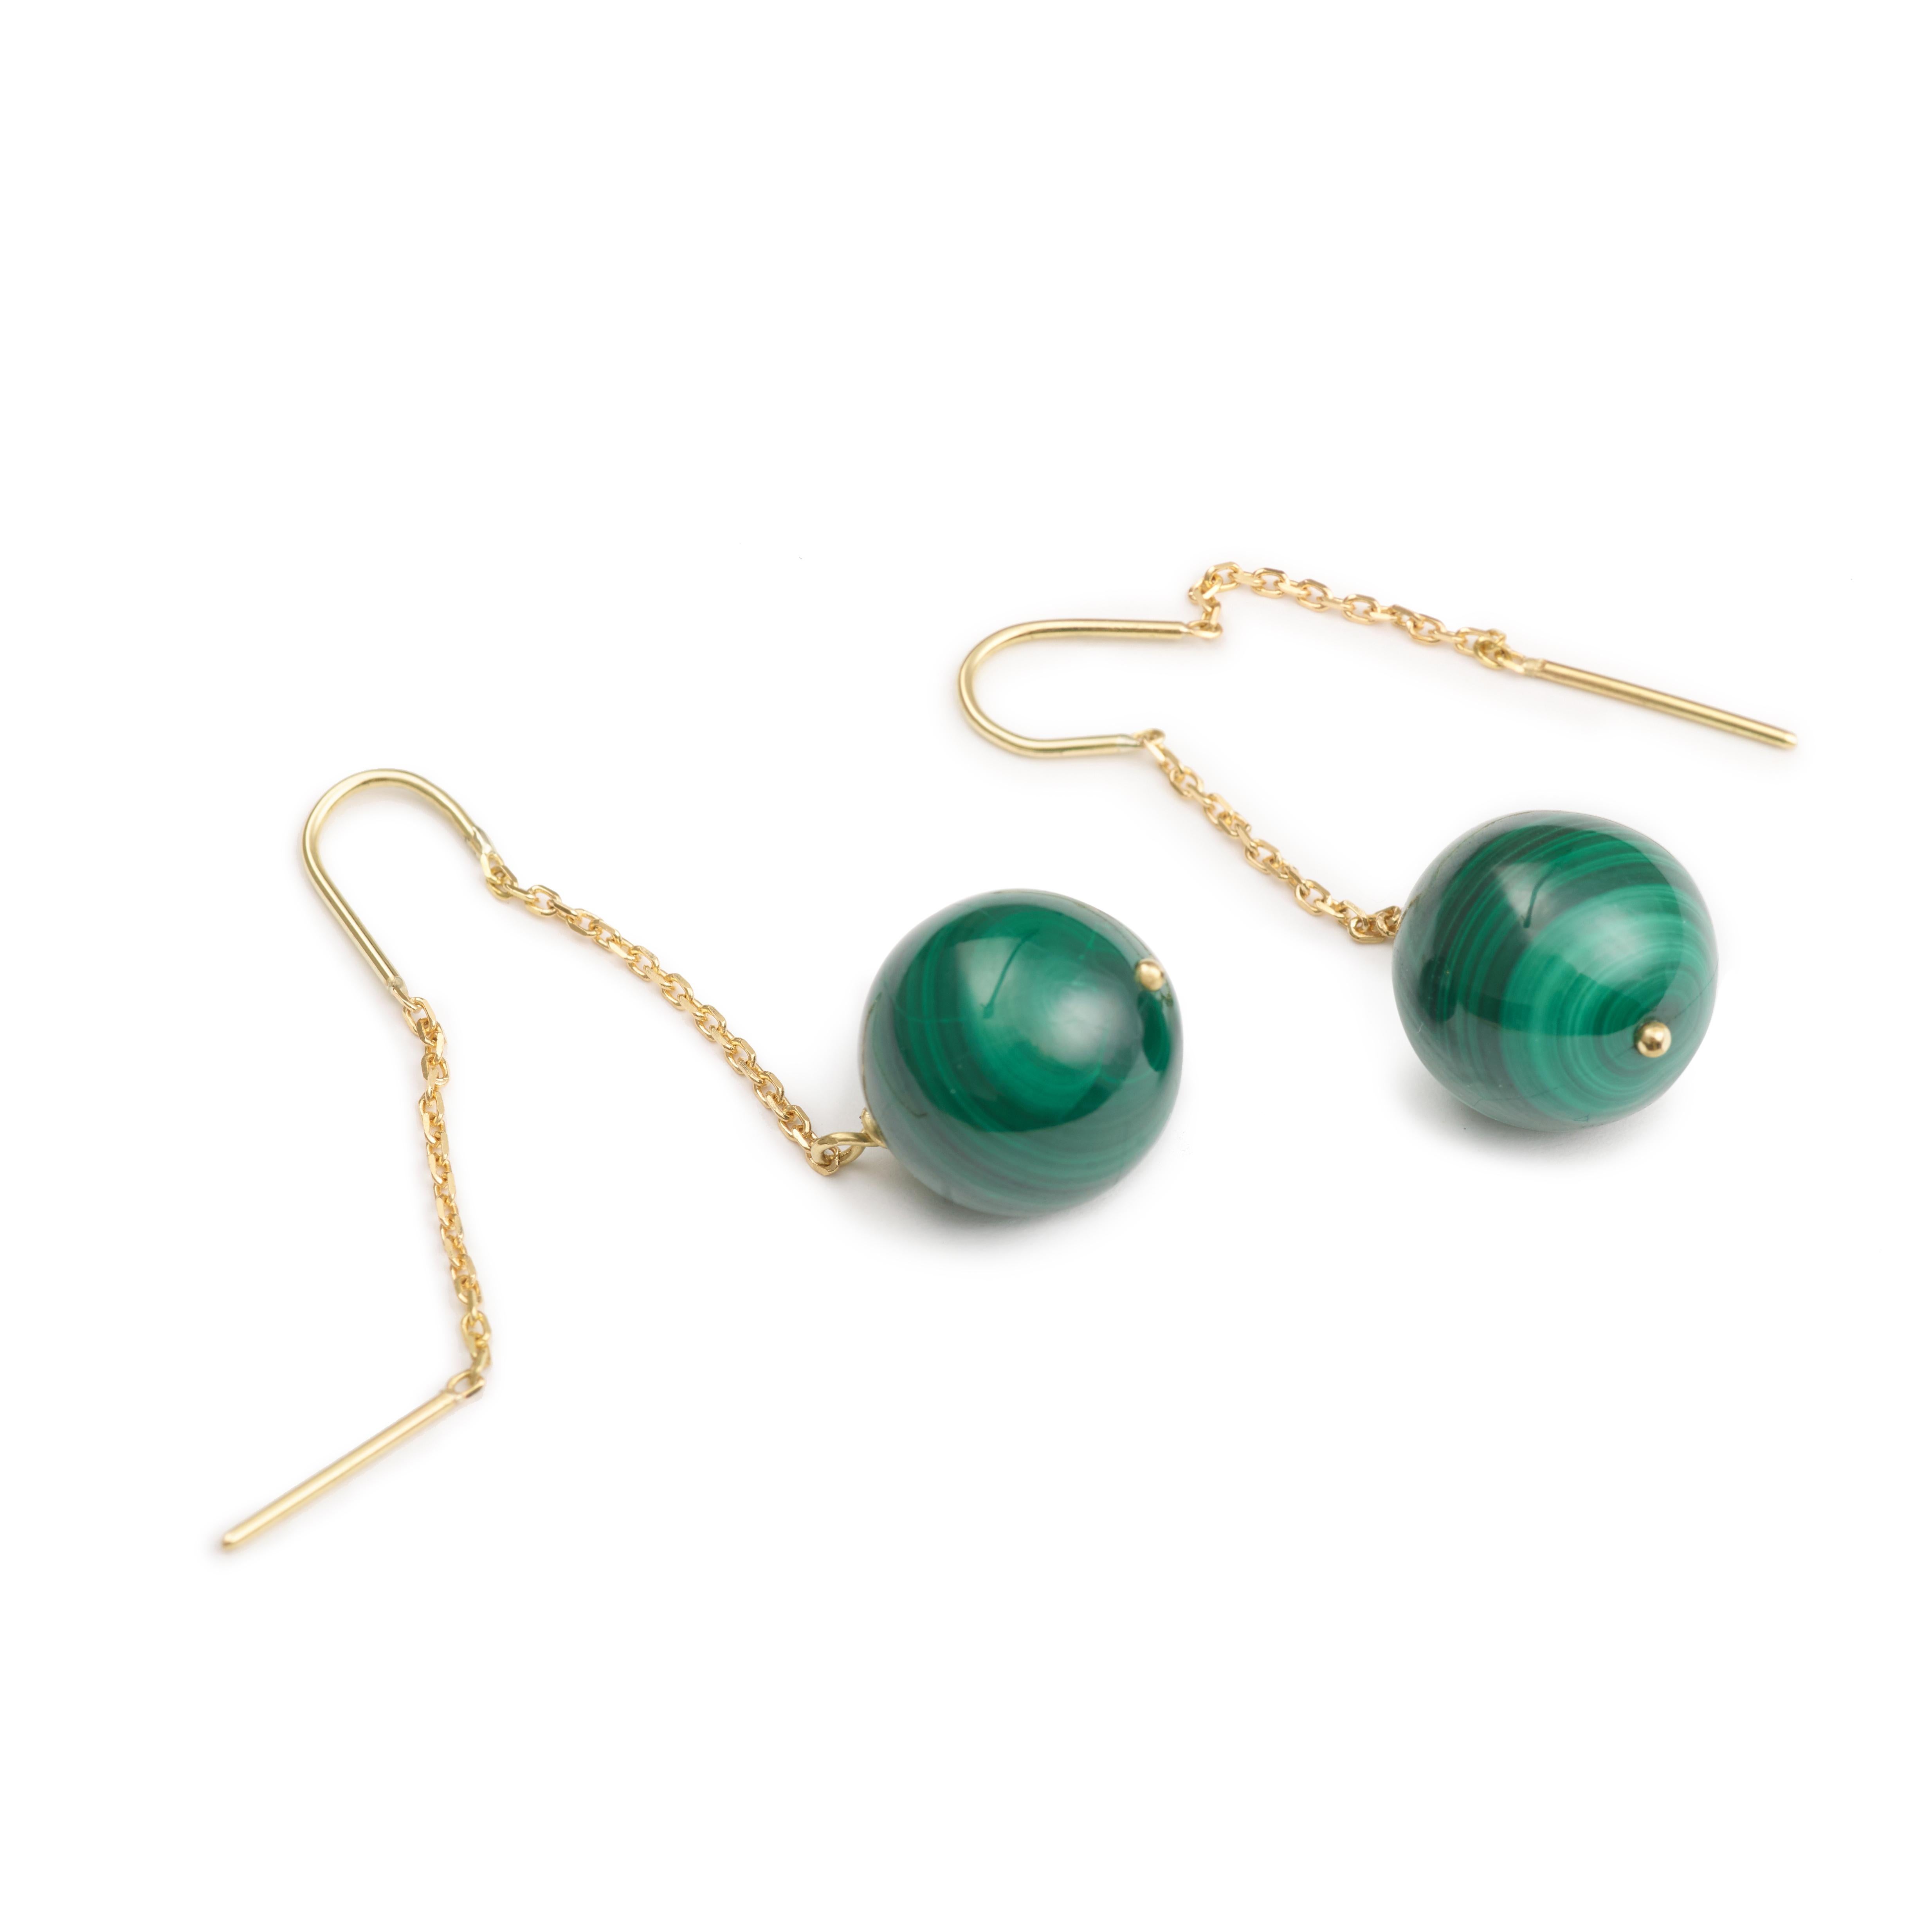 Lovely pair of gold pendant earrings with a malachite ball on each earring.

Dimensions of the malachite balls: 13 x 13 mm (0.51 x 0.51 inch)

Total weight of the earrings: 10.1 g

18 karat yellow gold, 750/1000ths

We can make these earrings with